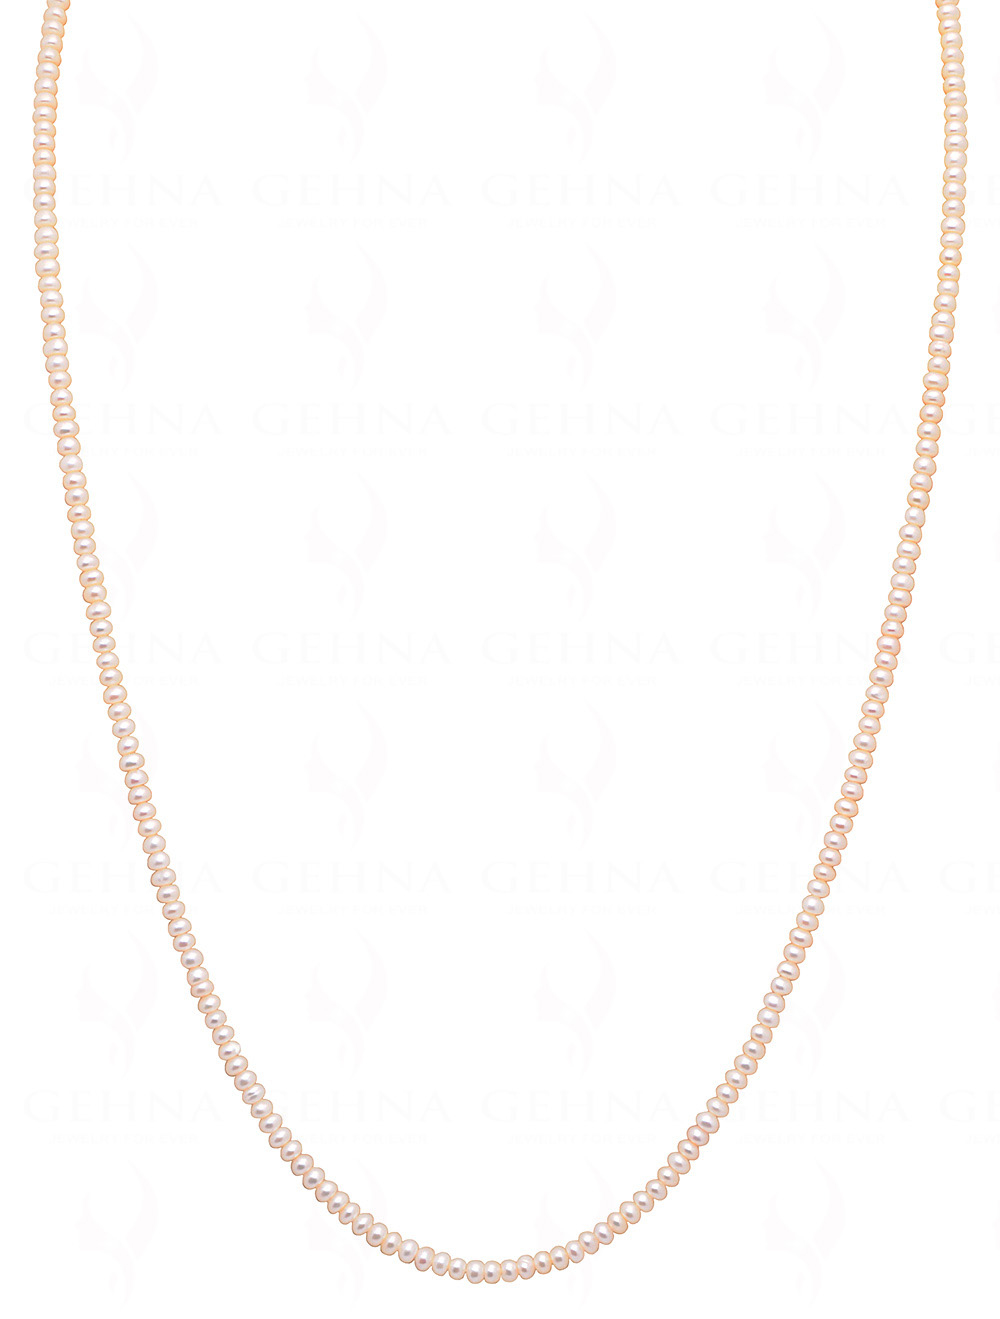 8mm 925 Sterling Silver Cuban Curb Link Chain Necklace 26 inch - Walmart.com